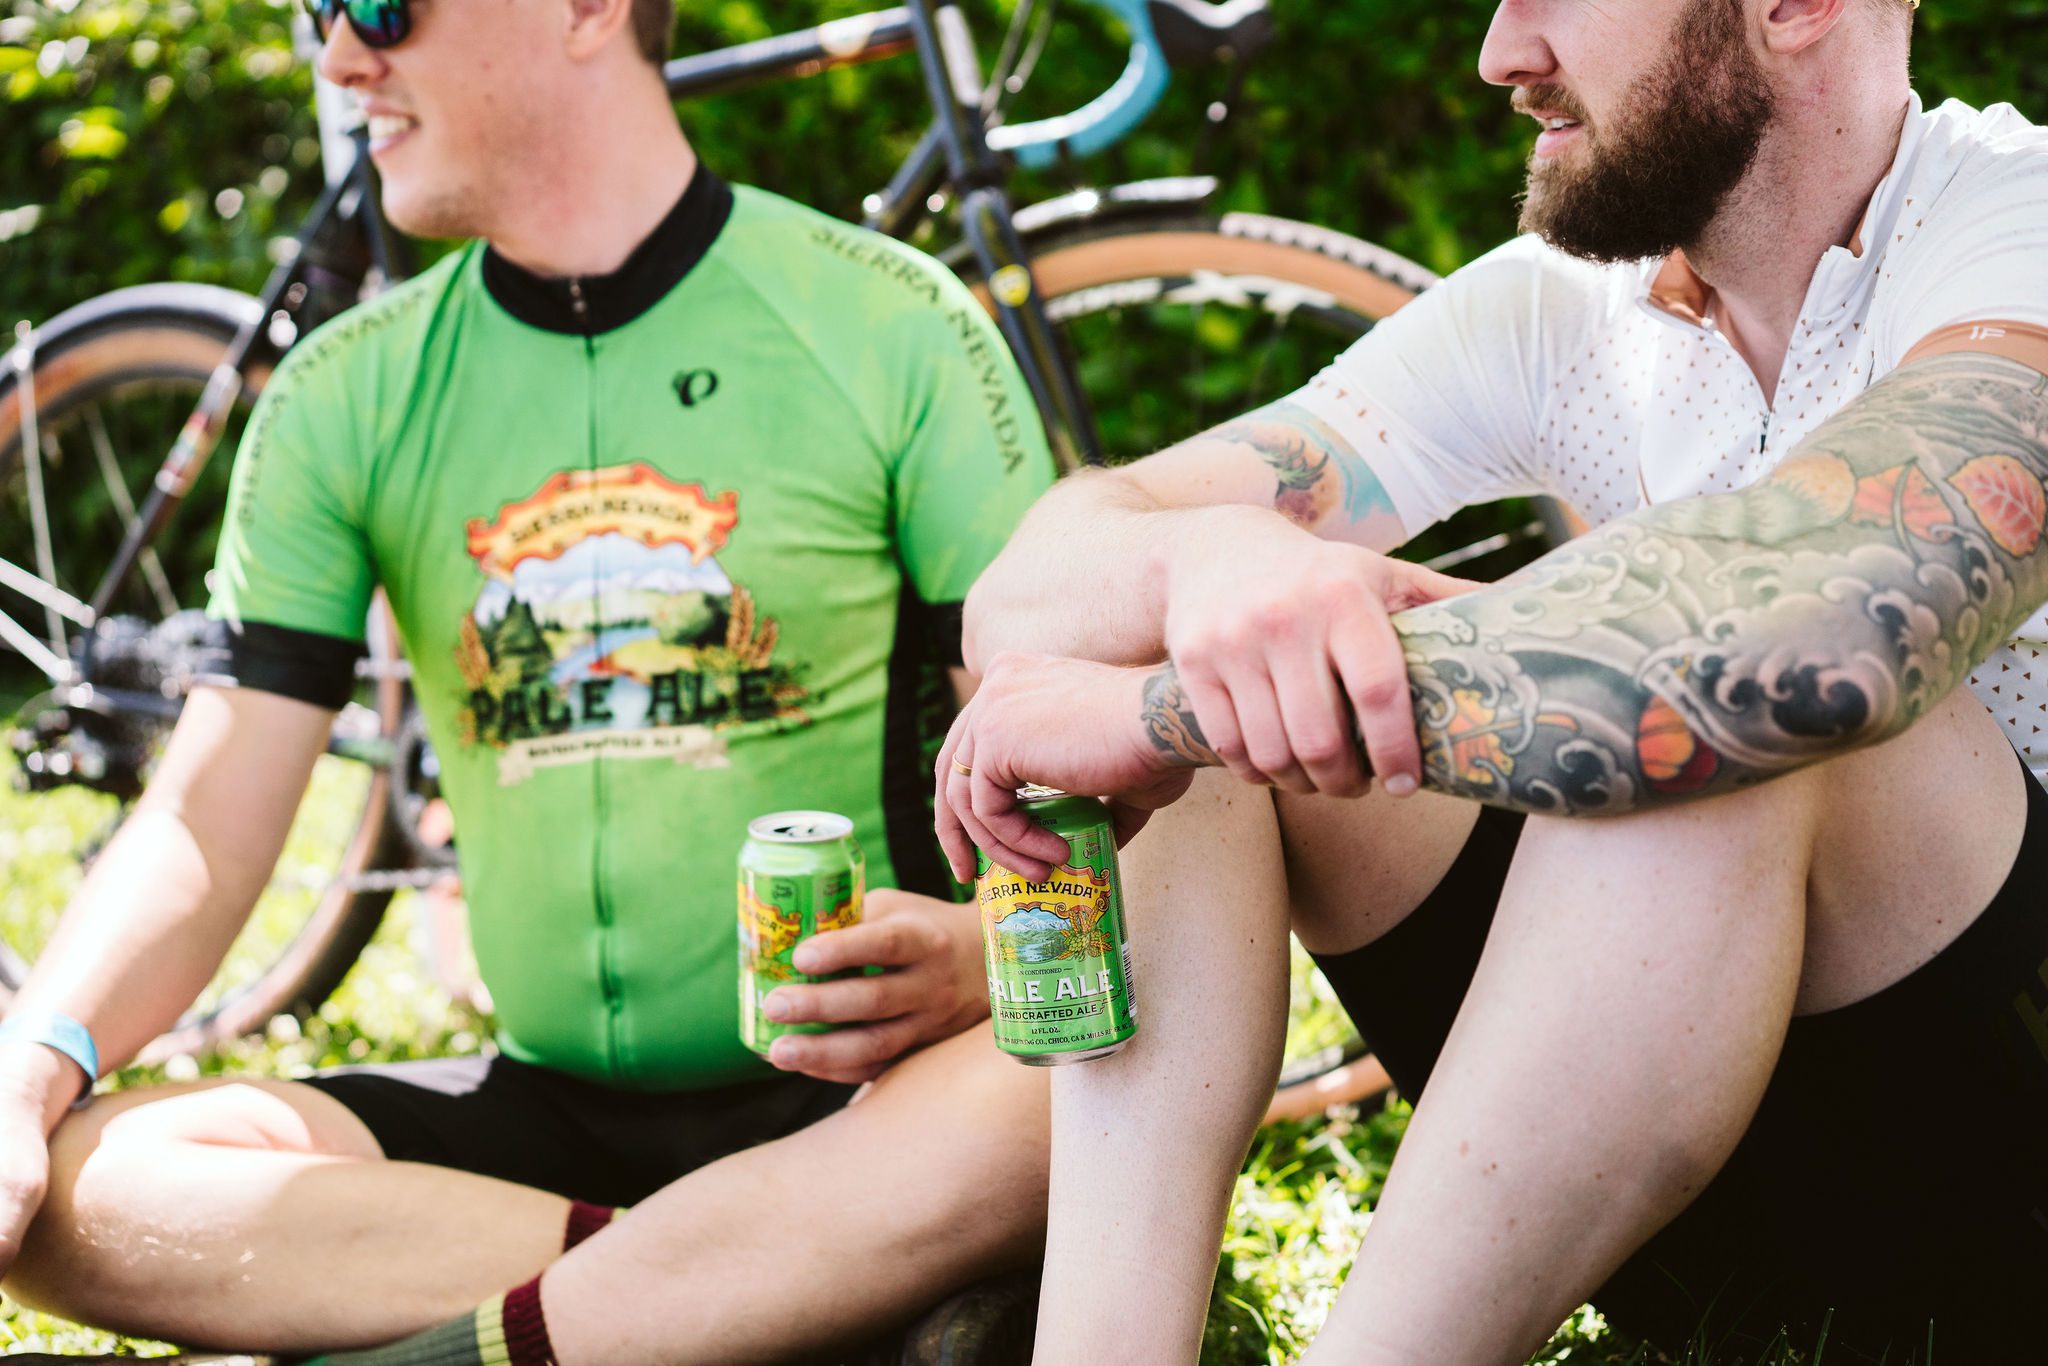 Two cyclists talking and holding Sierra Nevada beers